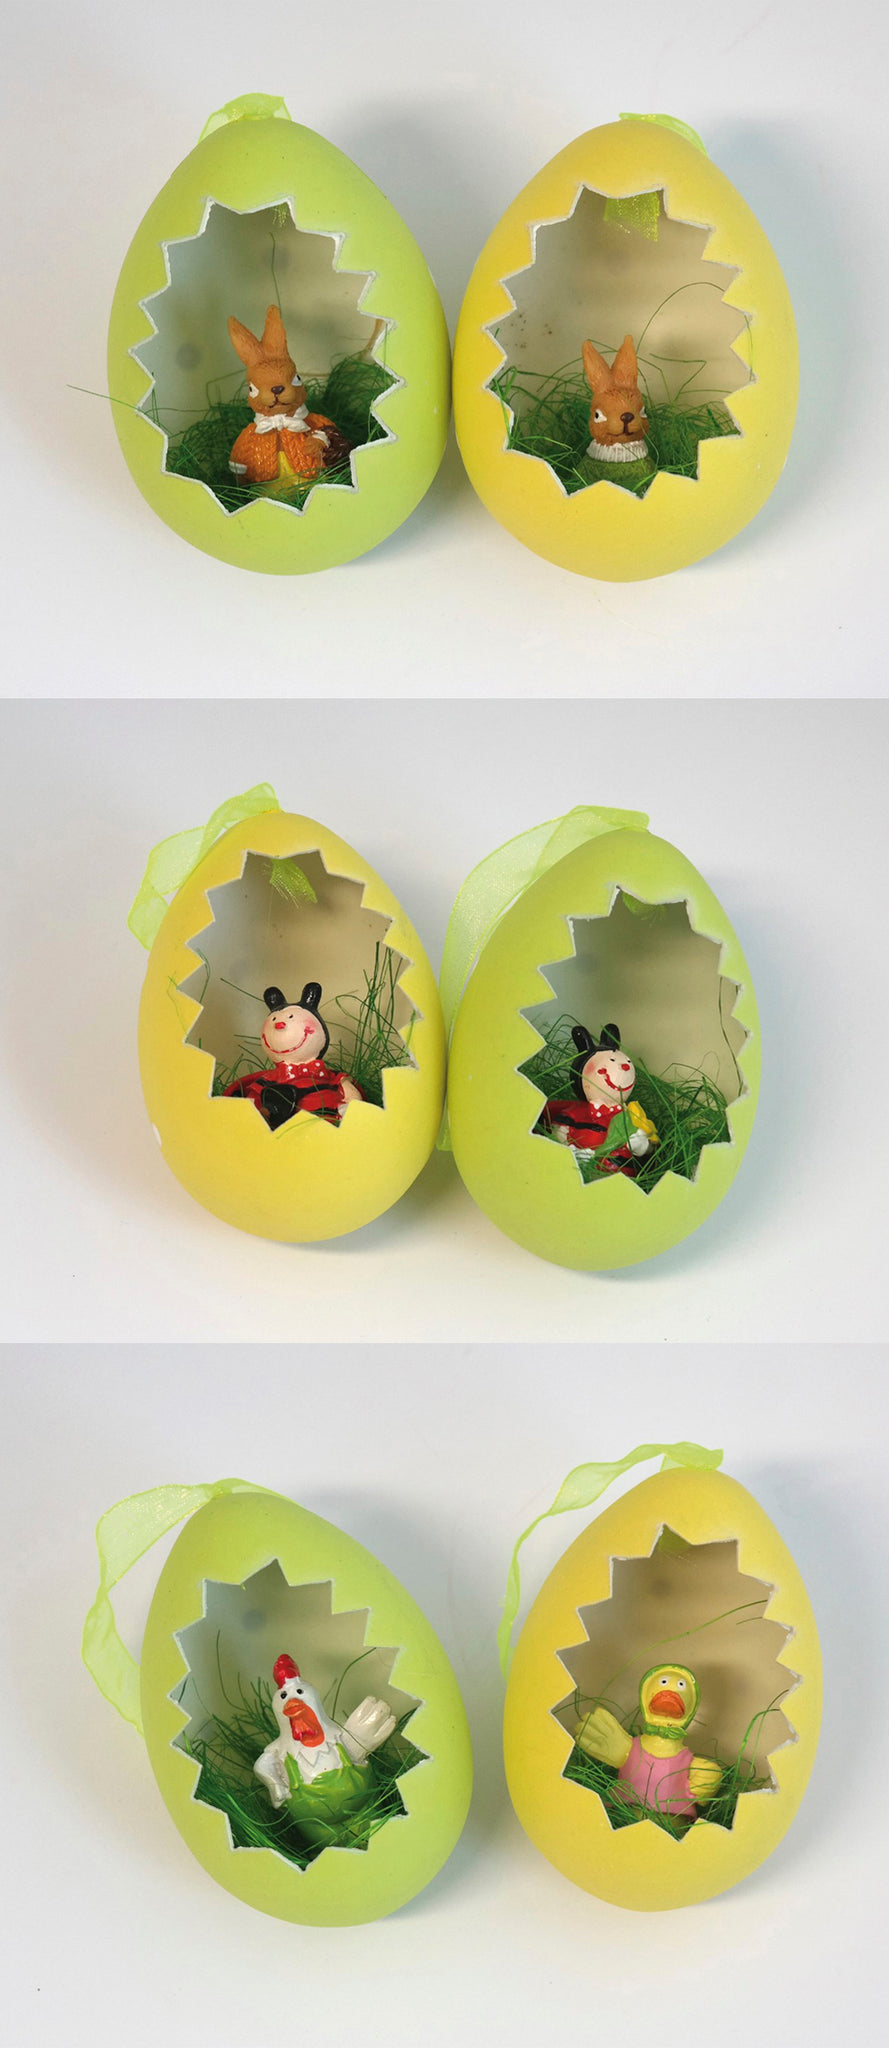 Easter eggs with decorative figures